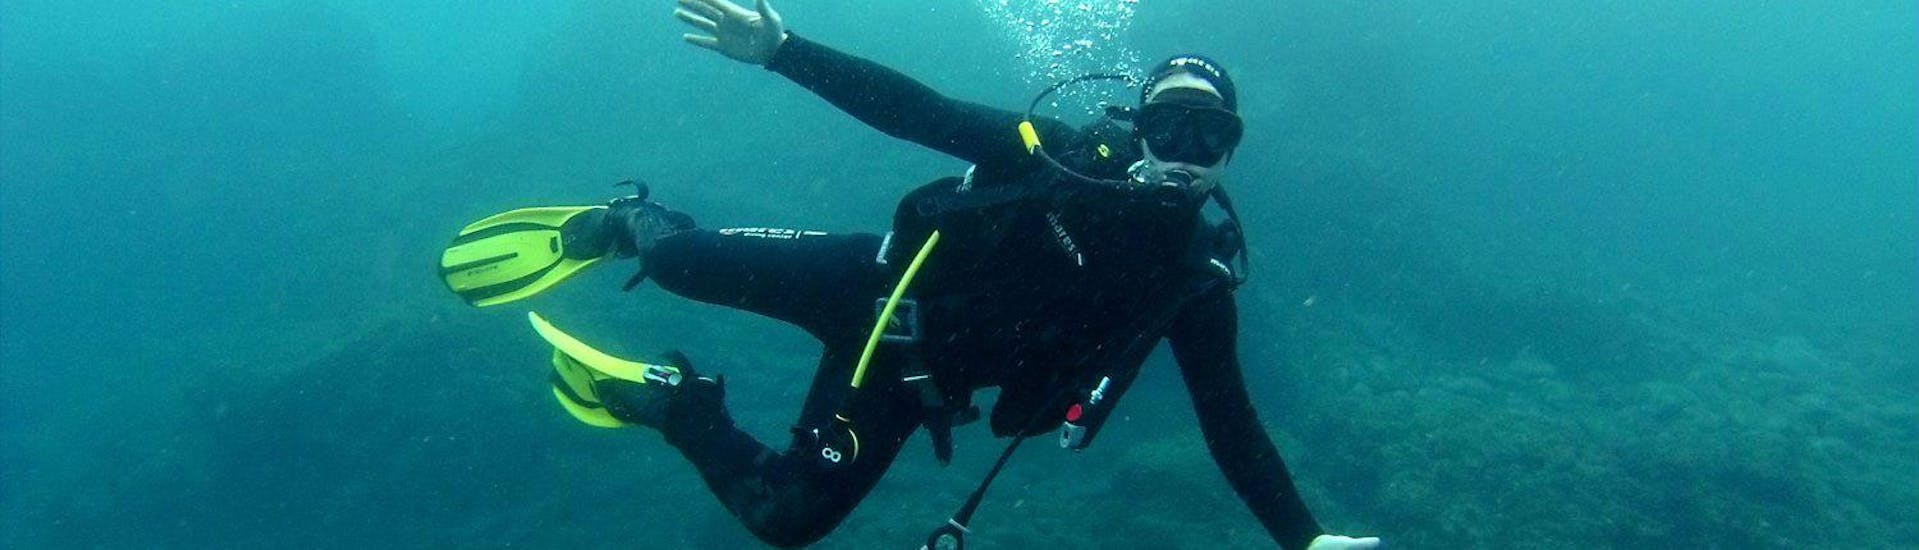 PADI Open Water Diver Course in Madeira for Beginners with Haliotis Madeira - Hero image